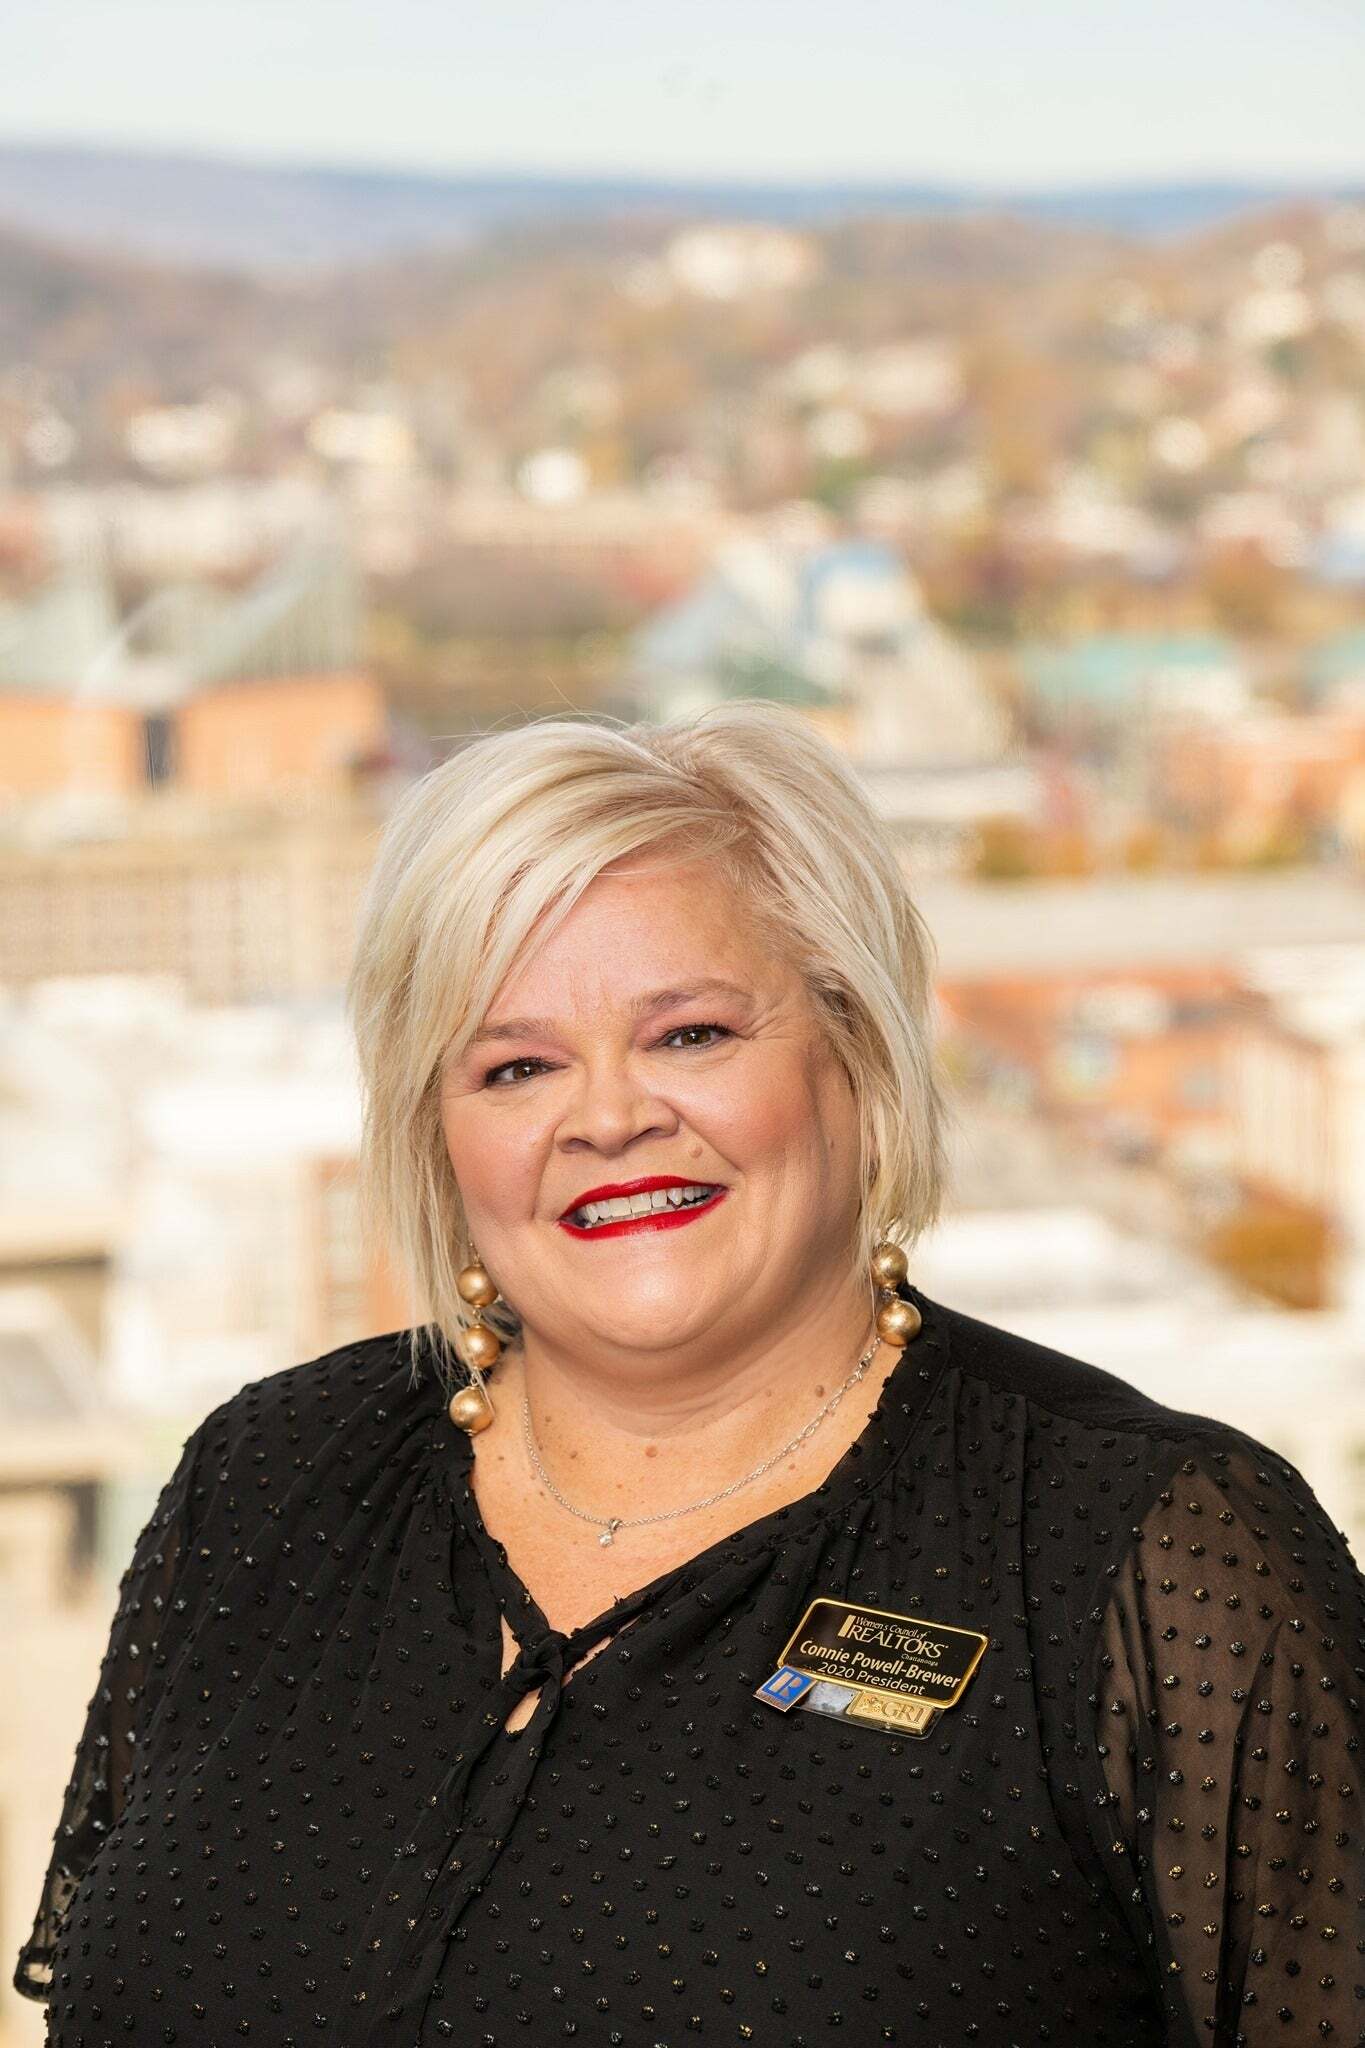 Connie Brewer, Real Estate Salesperson in Chattanooga, Pryor Realty, Inc.